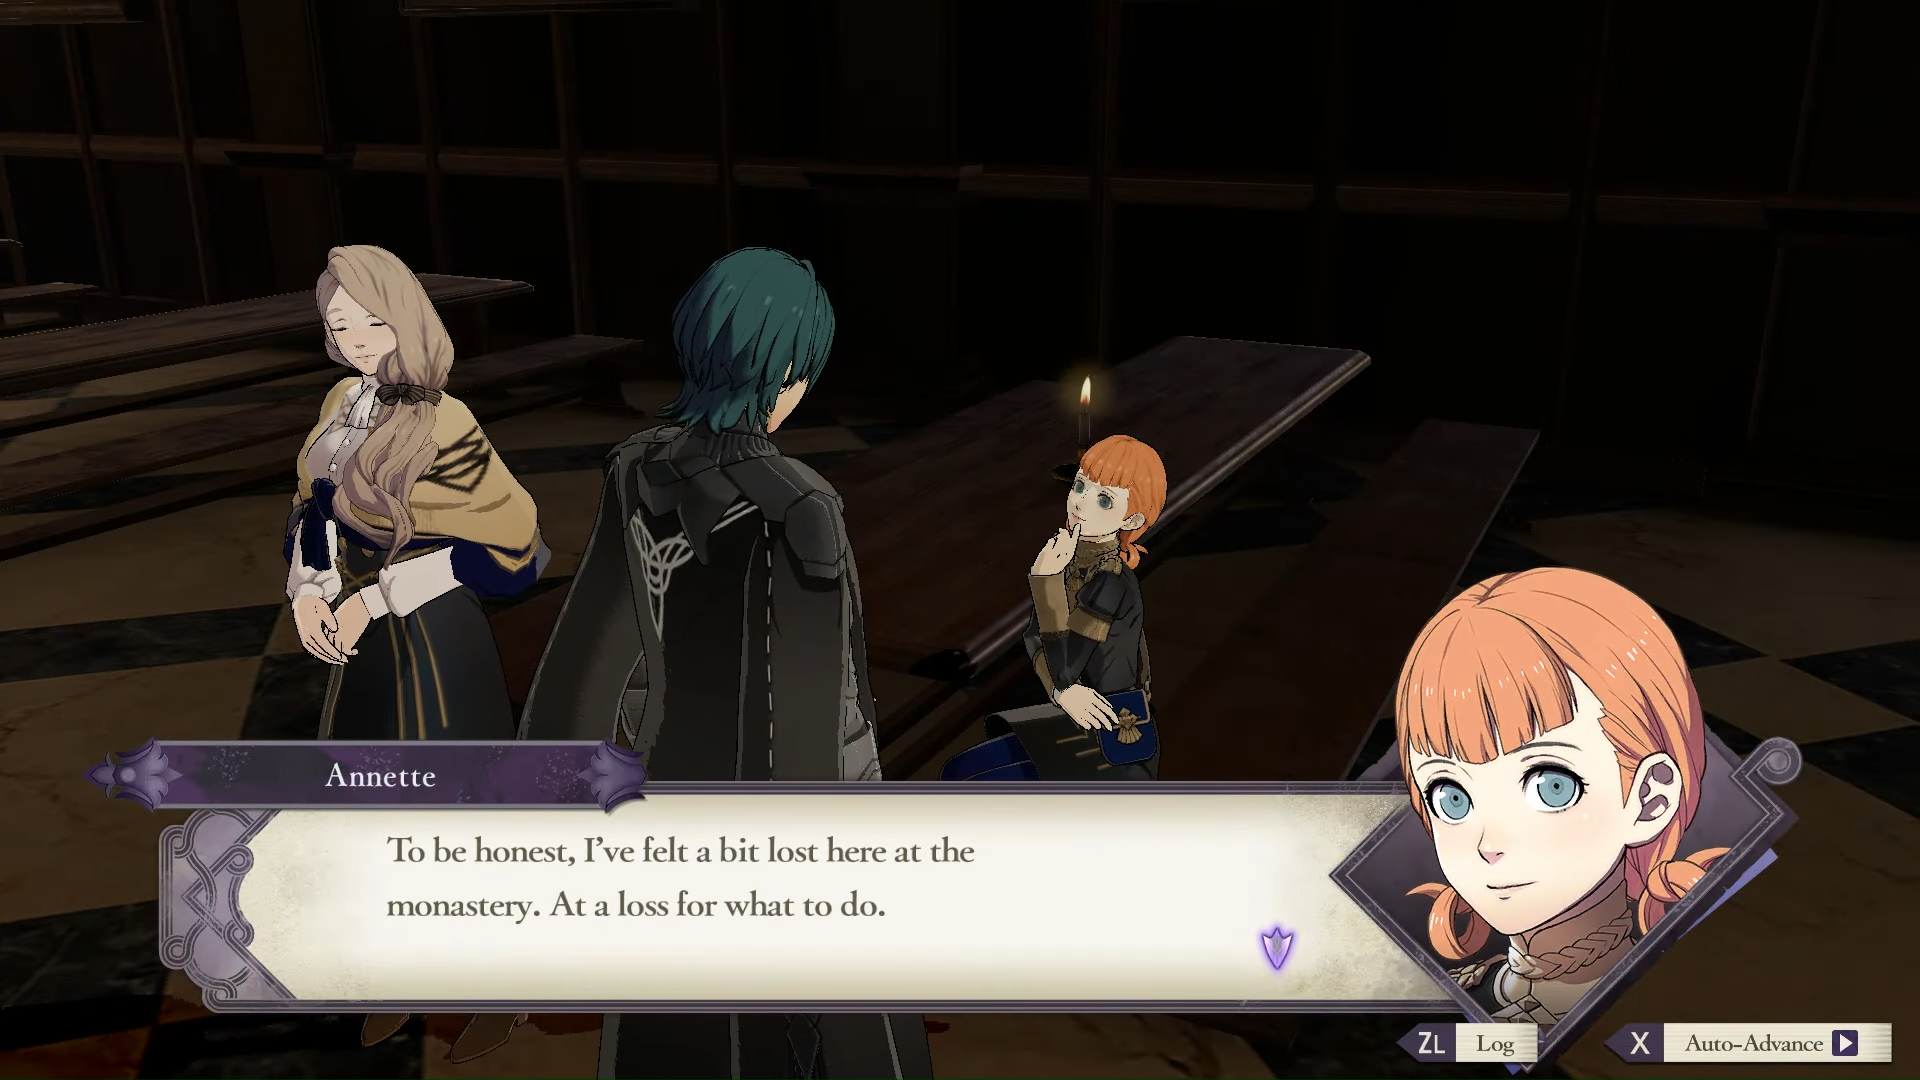 Fire Emblem: Three Houses - What Do the Beginning Choices Mean?